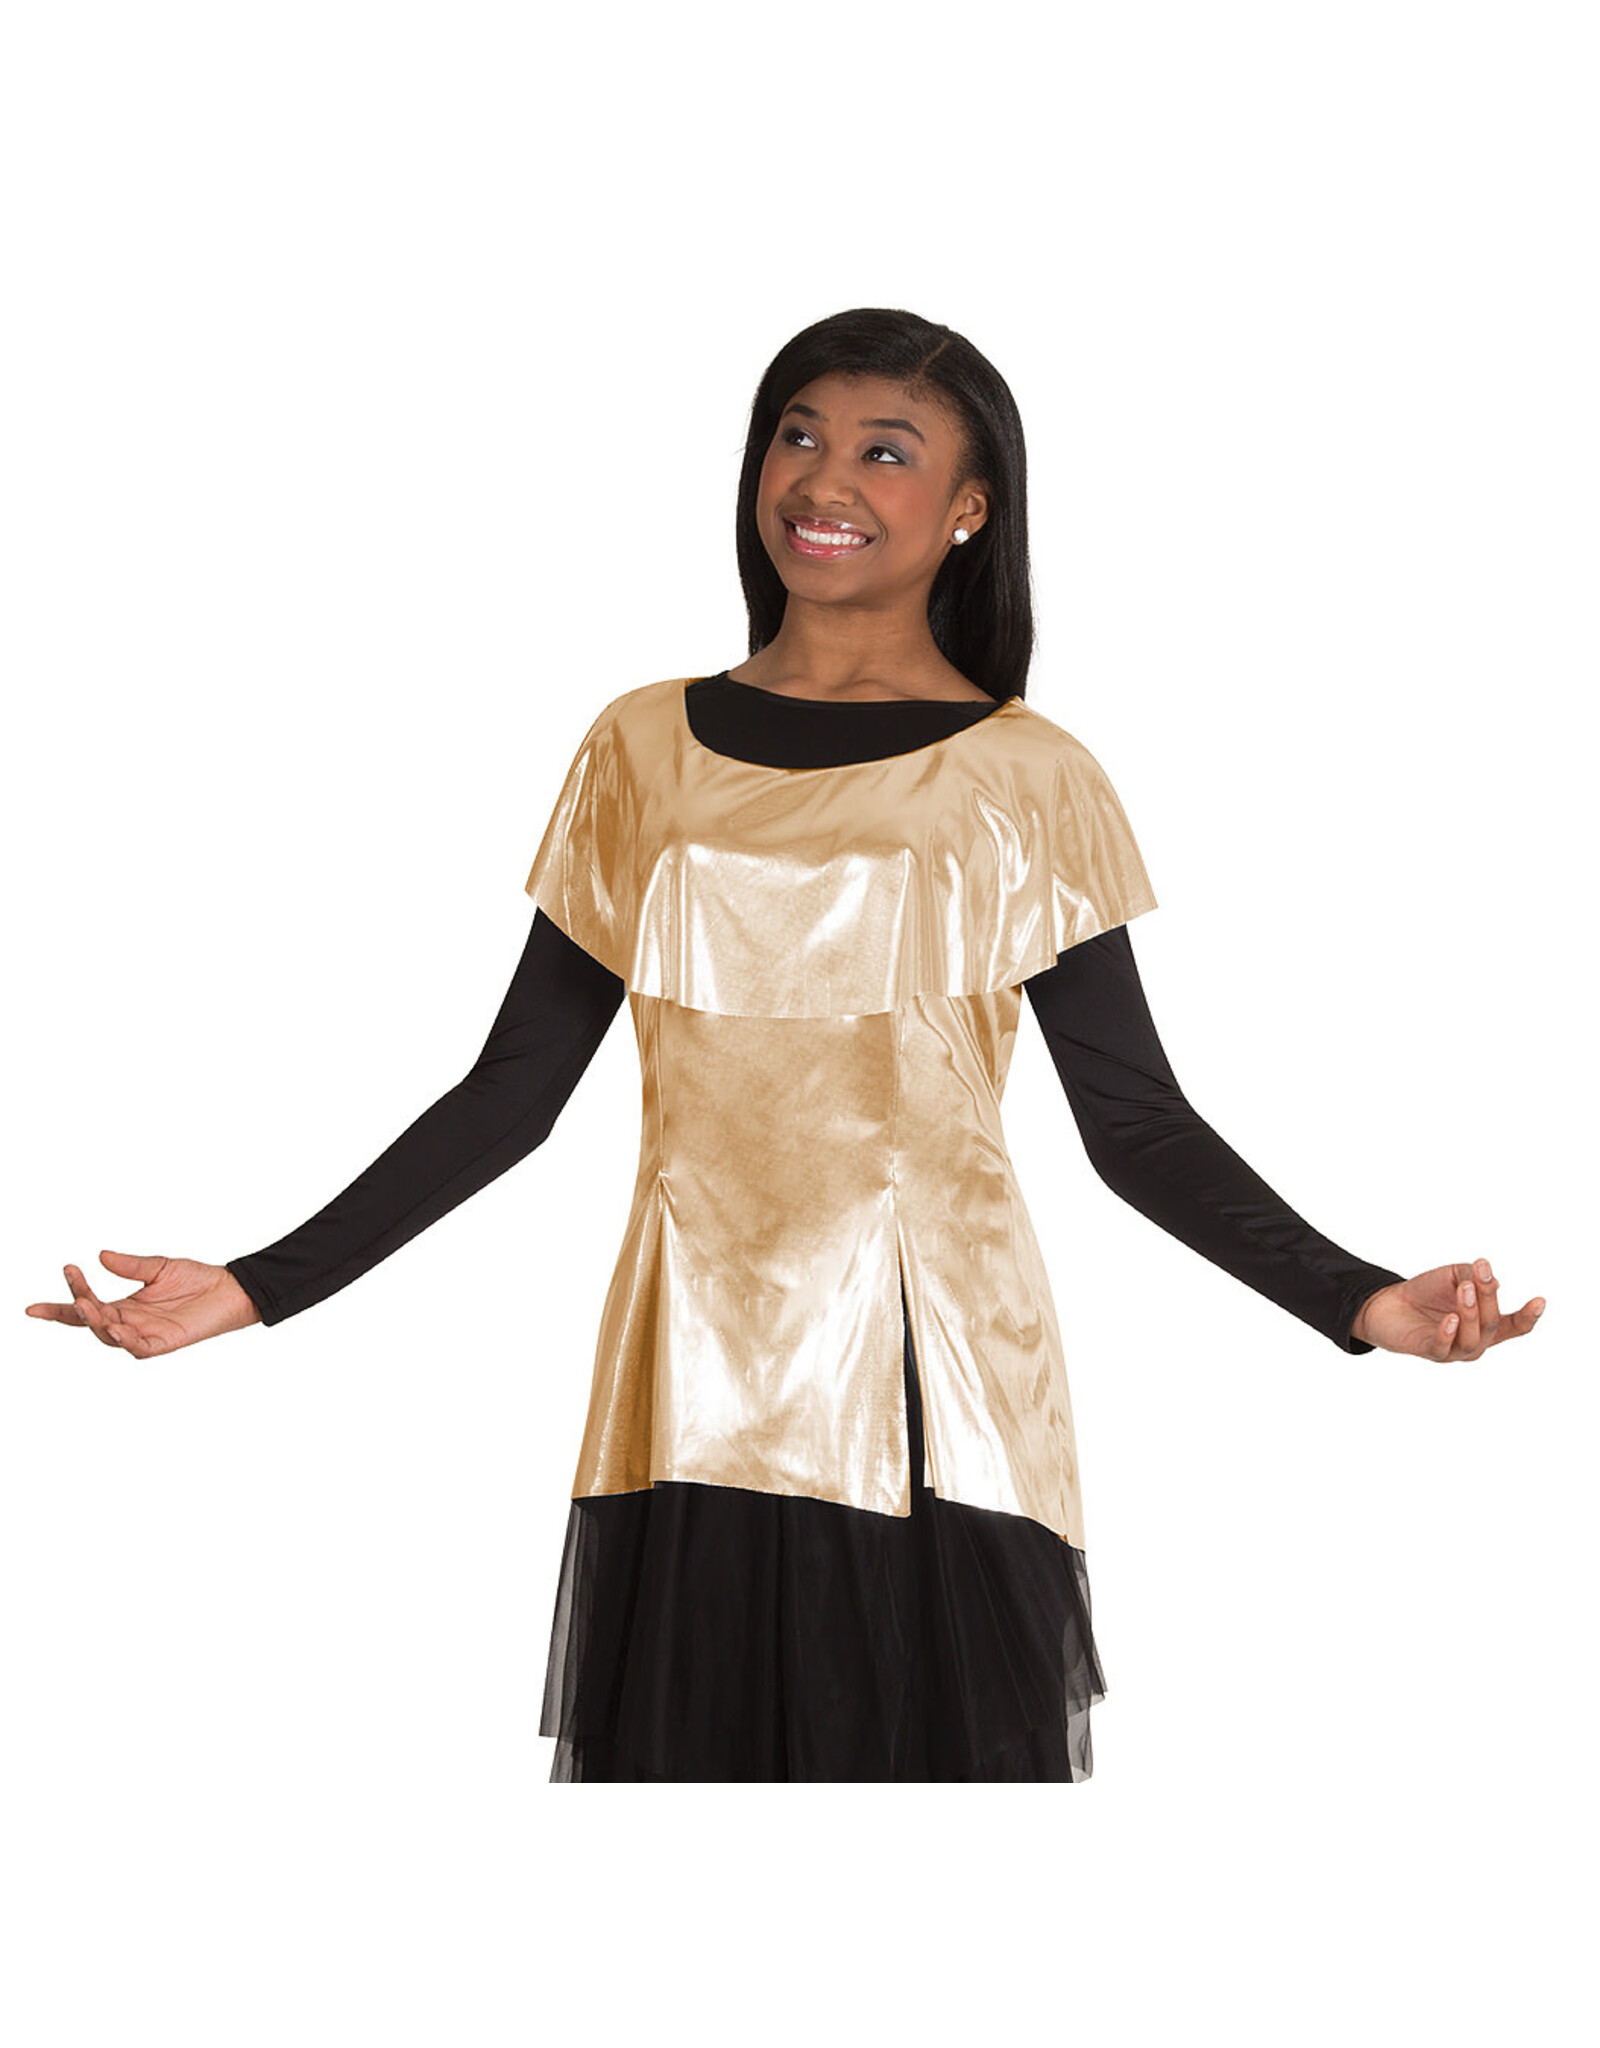 Body Wrappers Gold Tunic